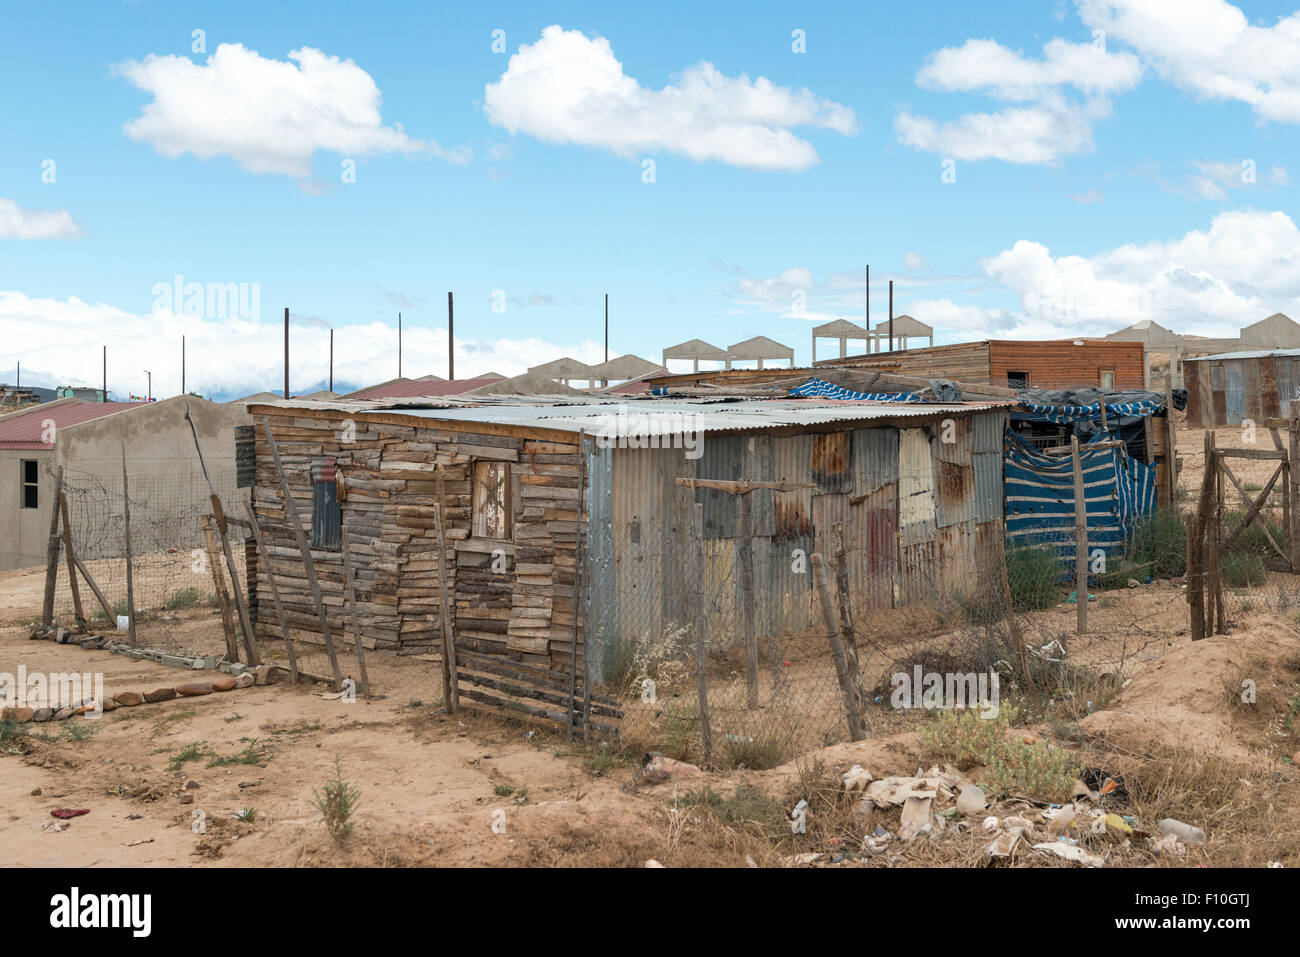 Sheds in a township in Oudtshorn, Western Cape, South Africa Stock Photo